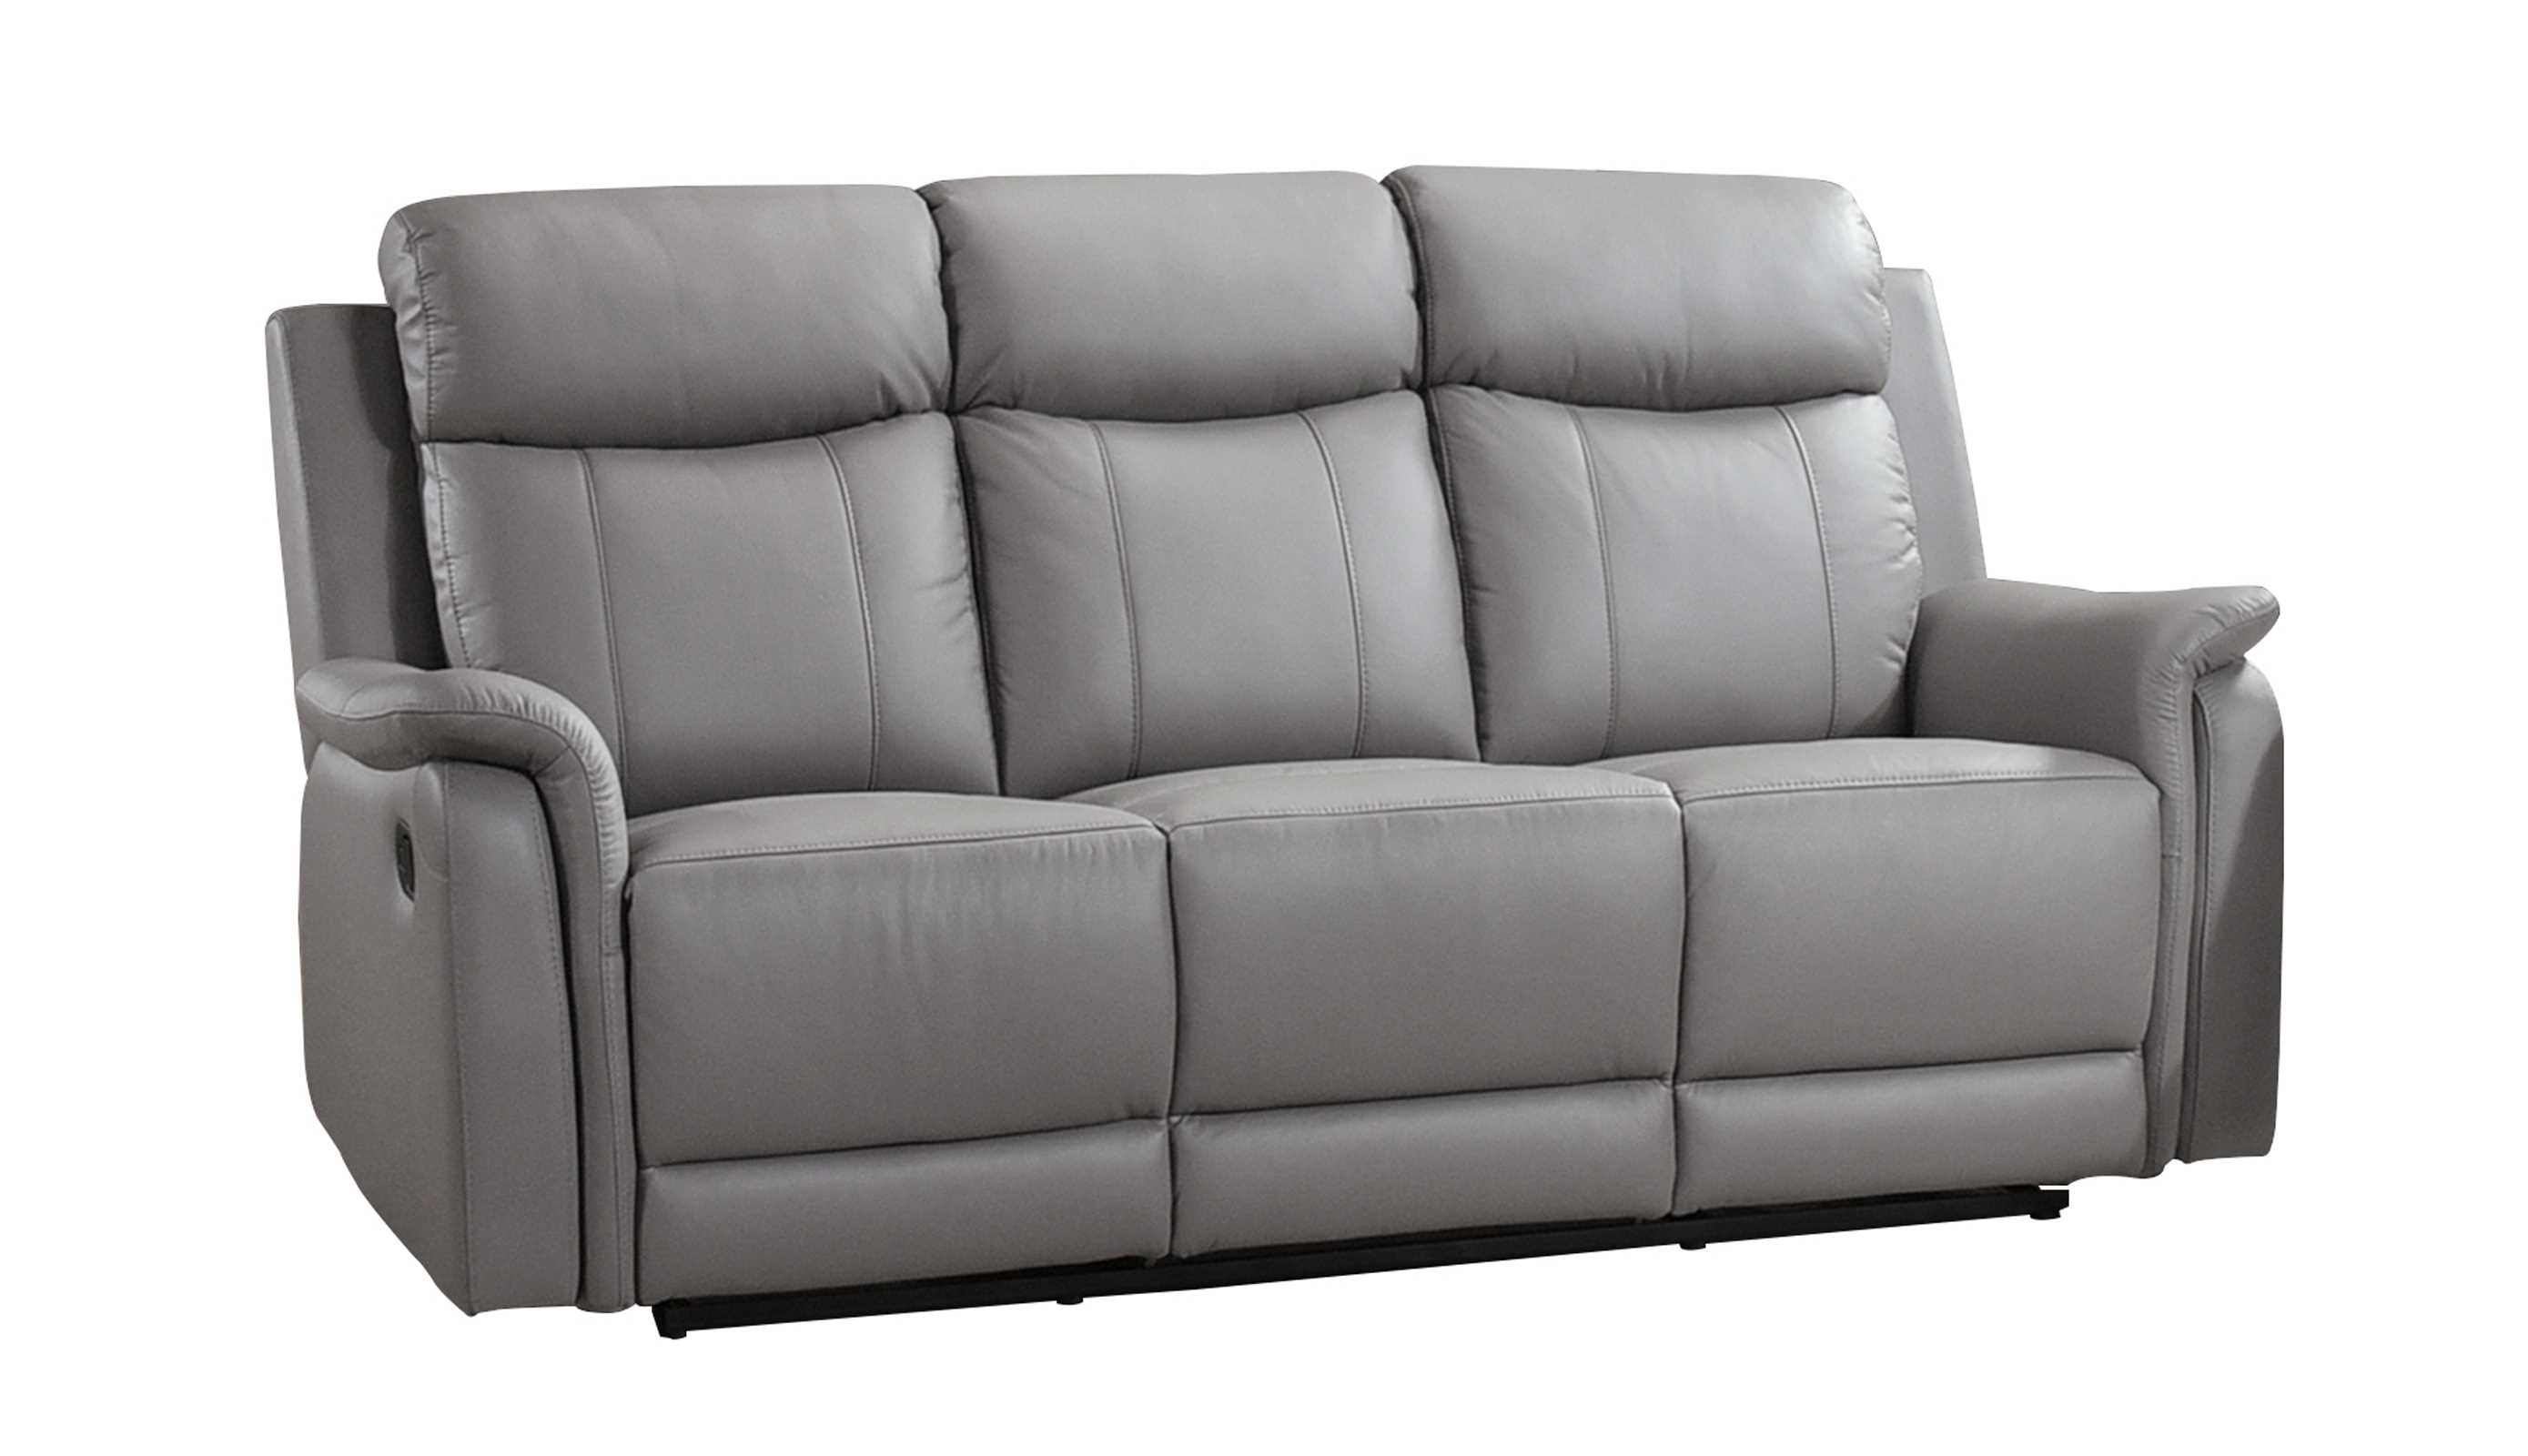 Cyrus Top Grain Leather Reclining Sofa Collection Light Grey 99840